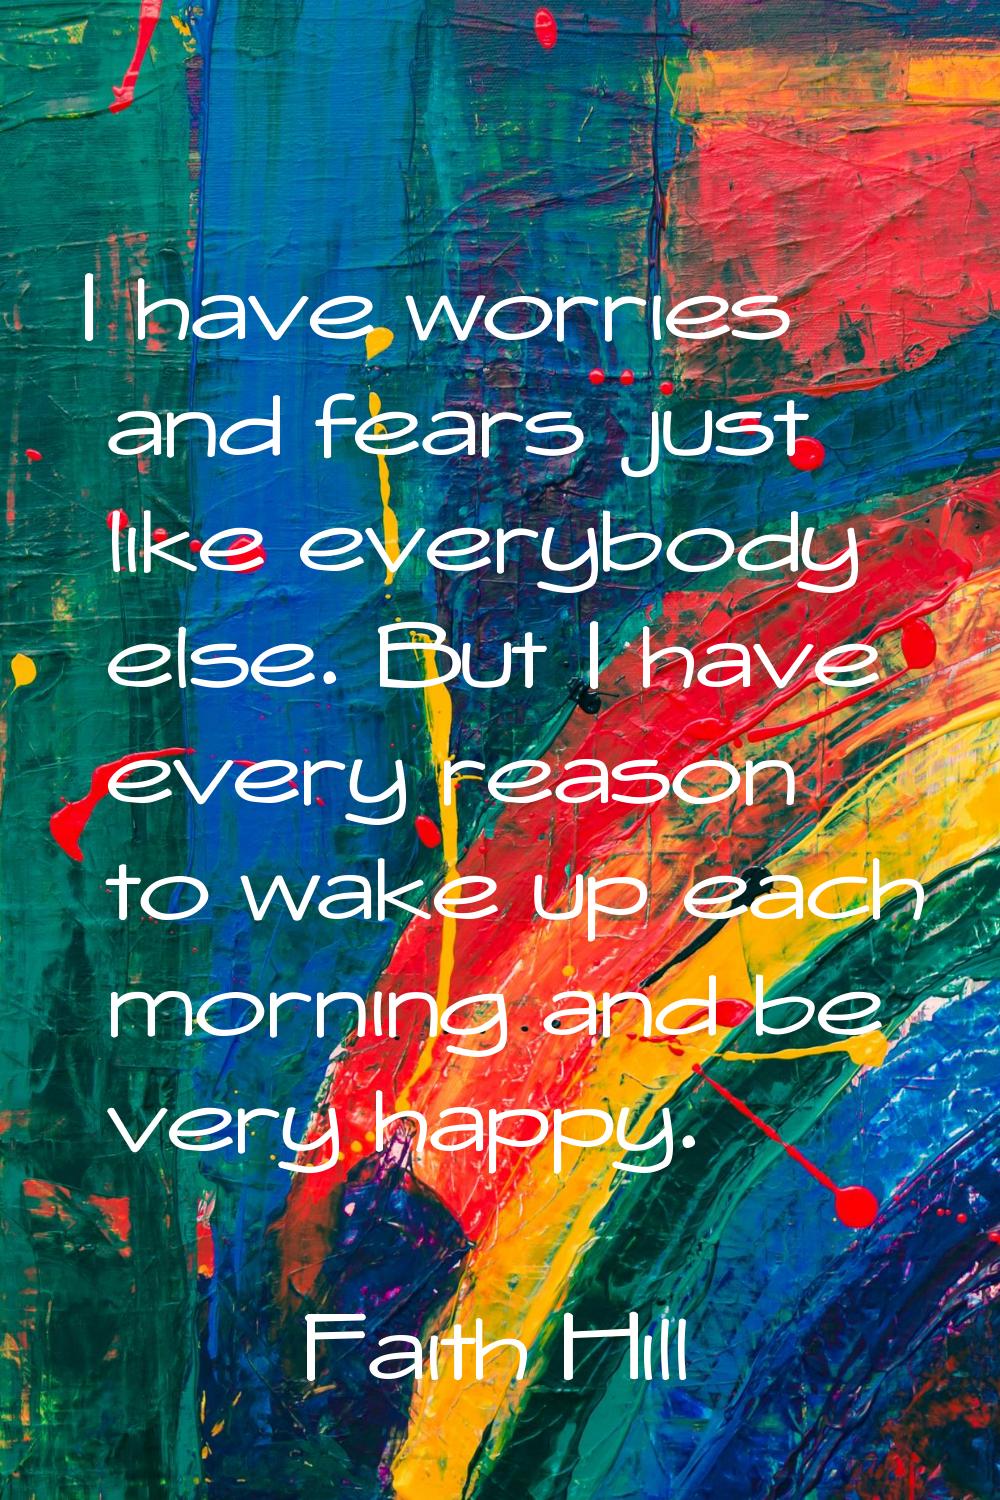 I have worries and fears just like everybody else. But I have every reason to wake up each morning 